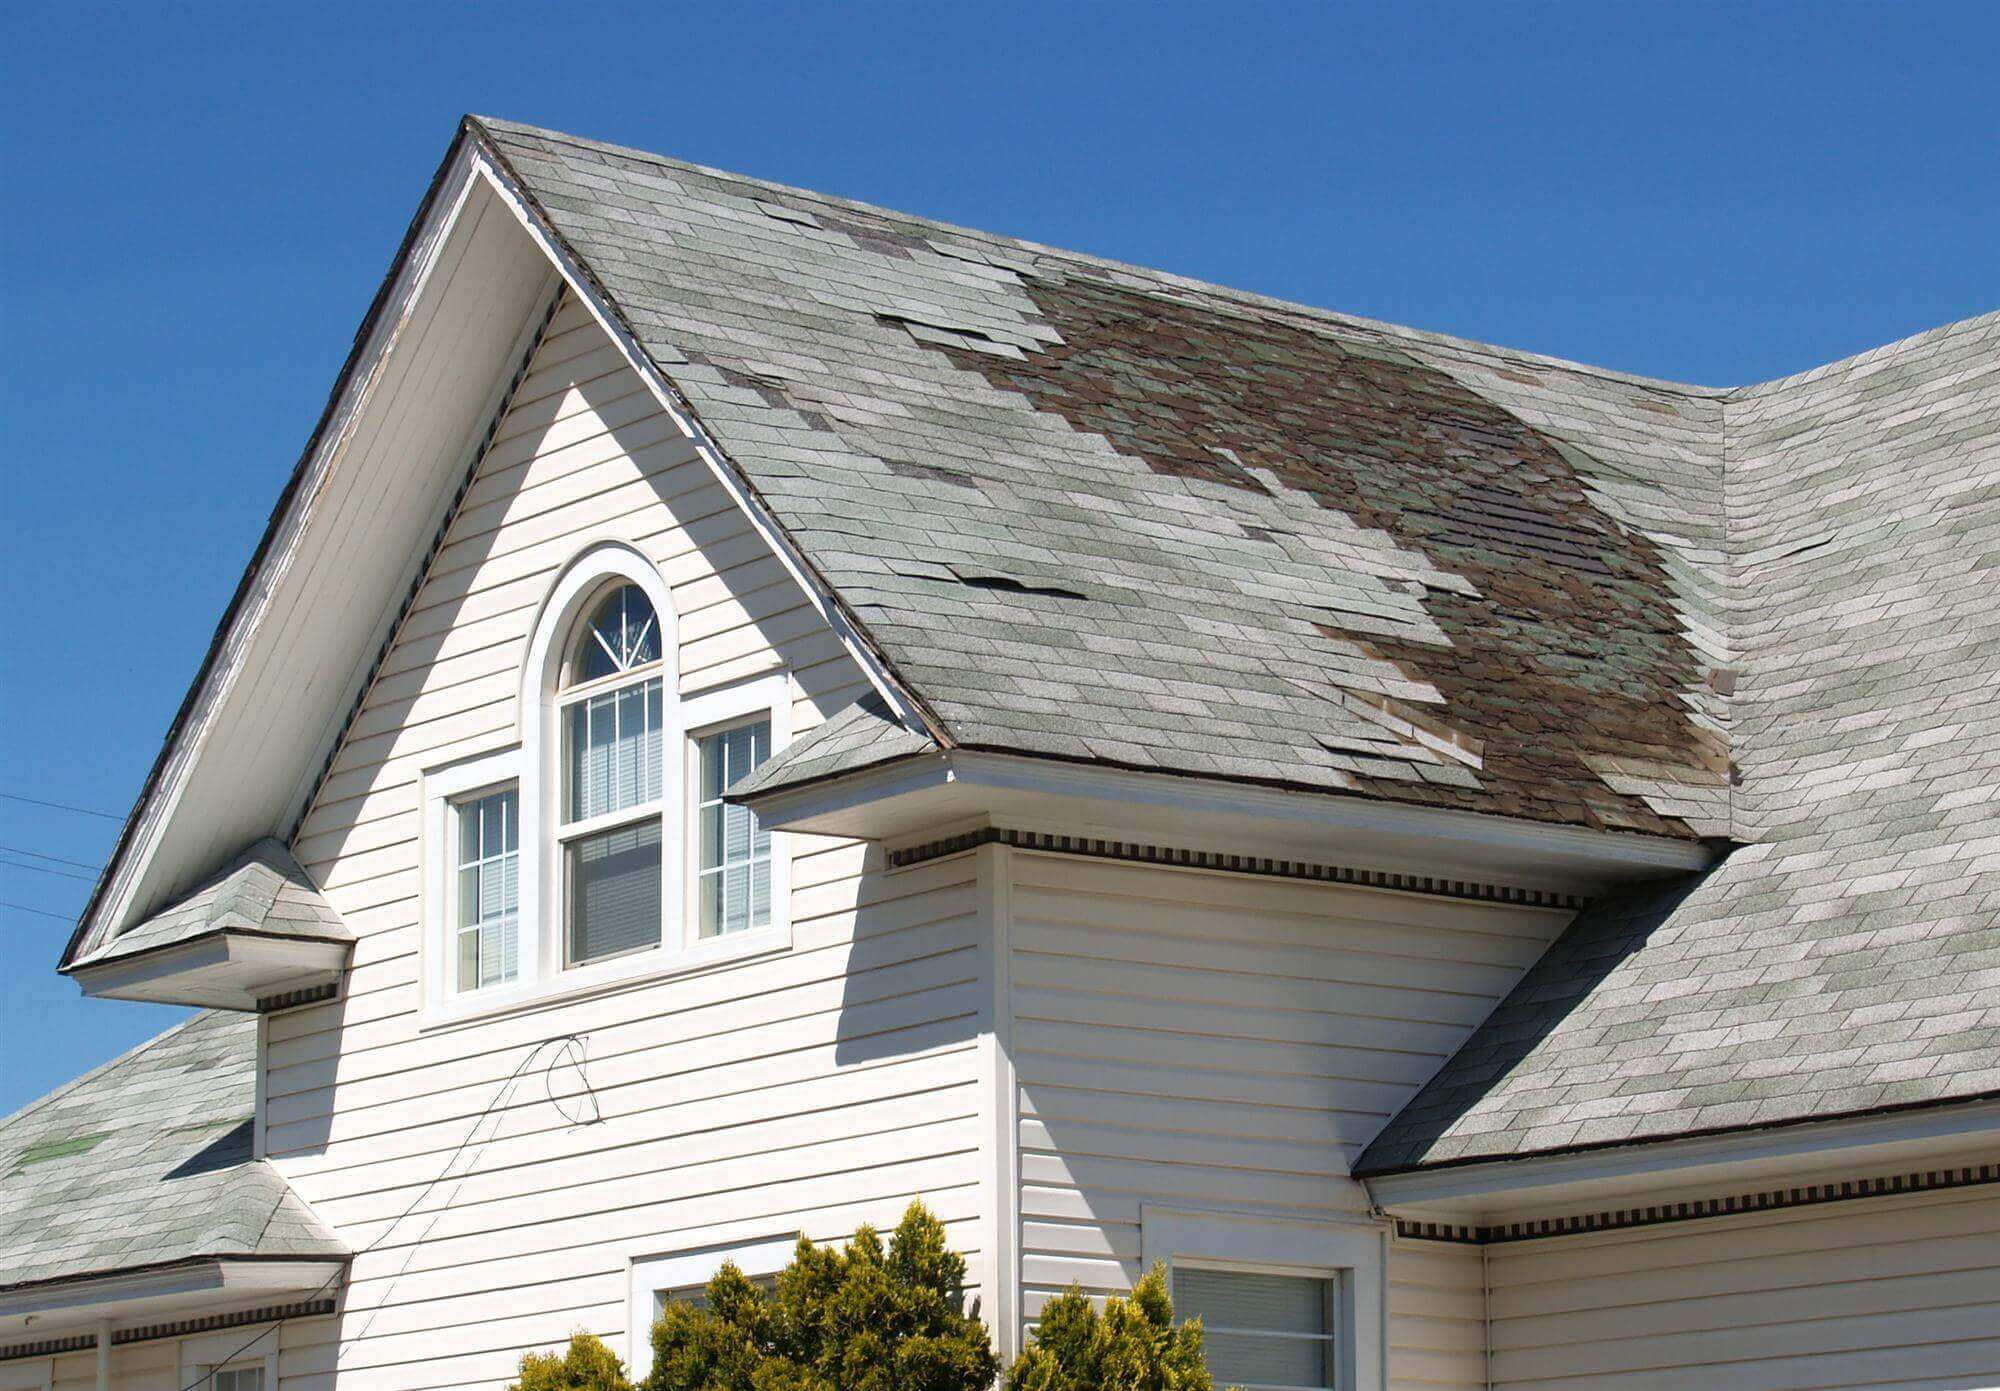 Roof shingle damage on two-story home in Green Bay, WI